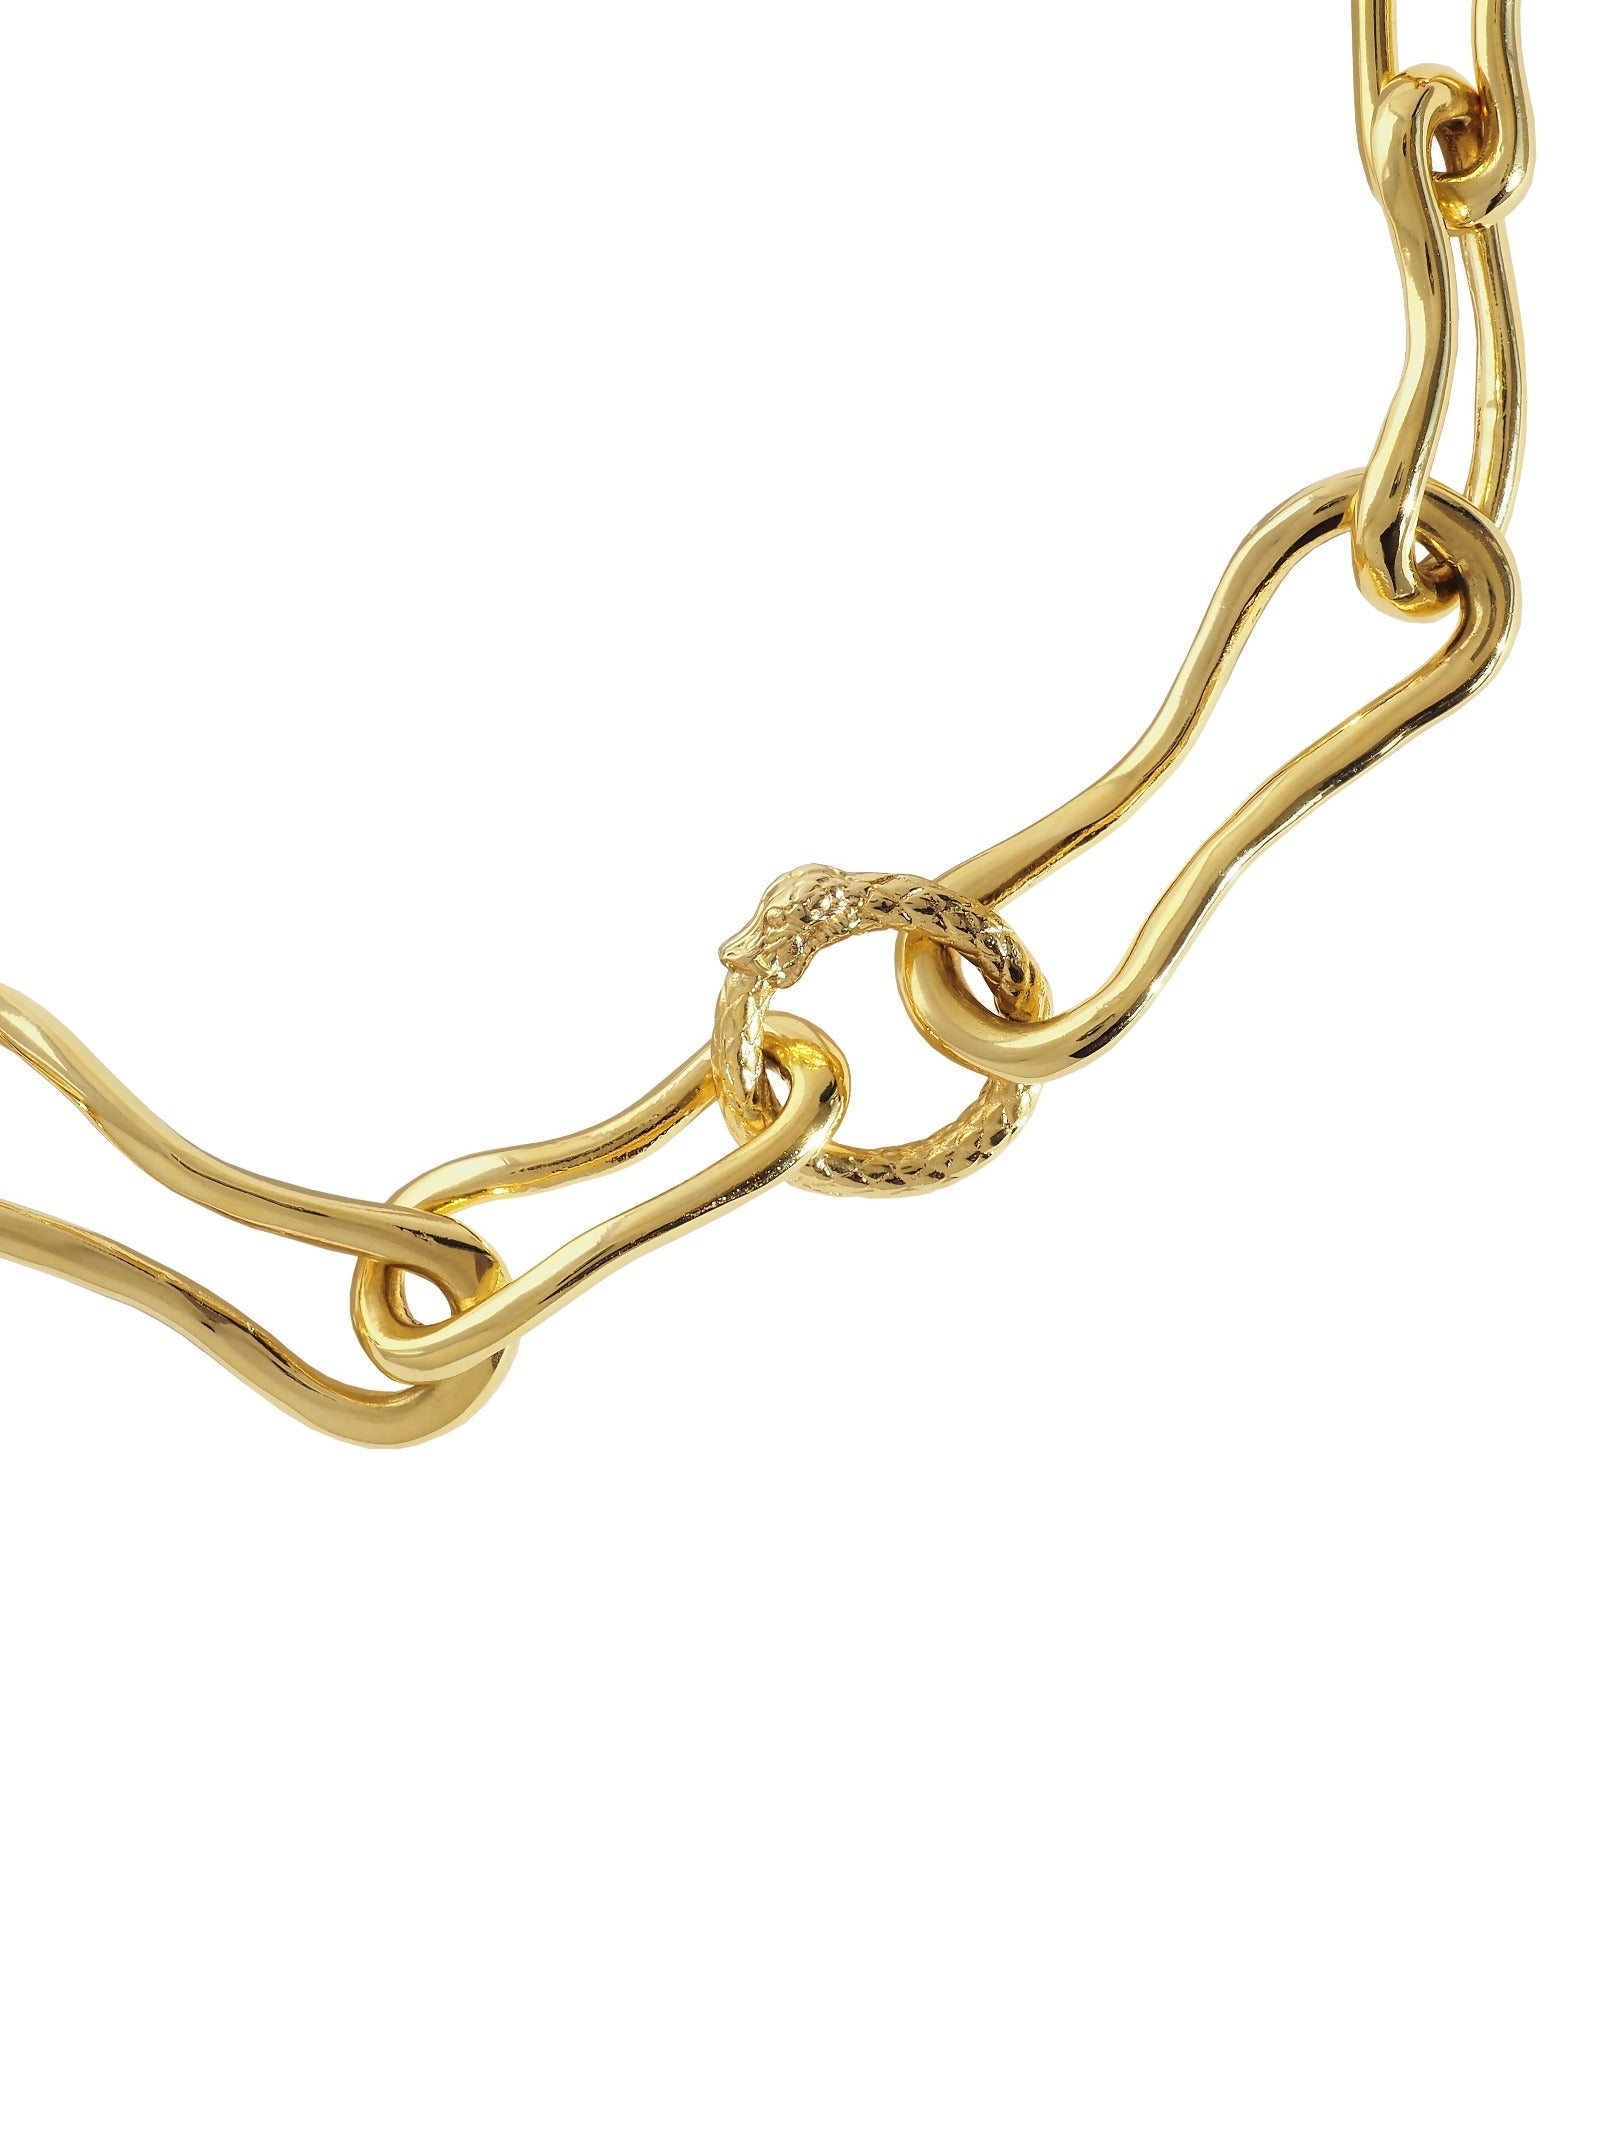 Ouroboros Chunky Necklace. Gold Plated. Gender Neutral